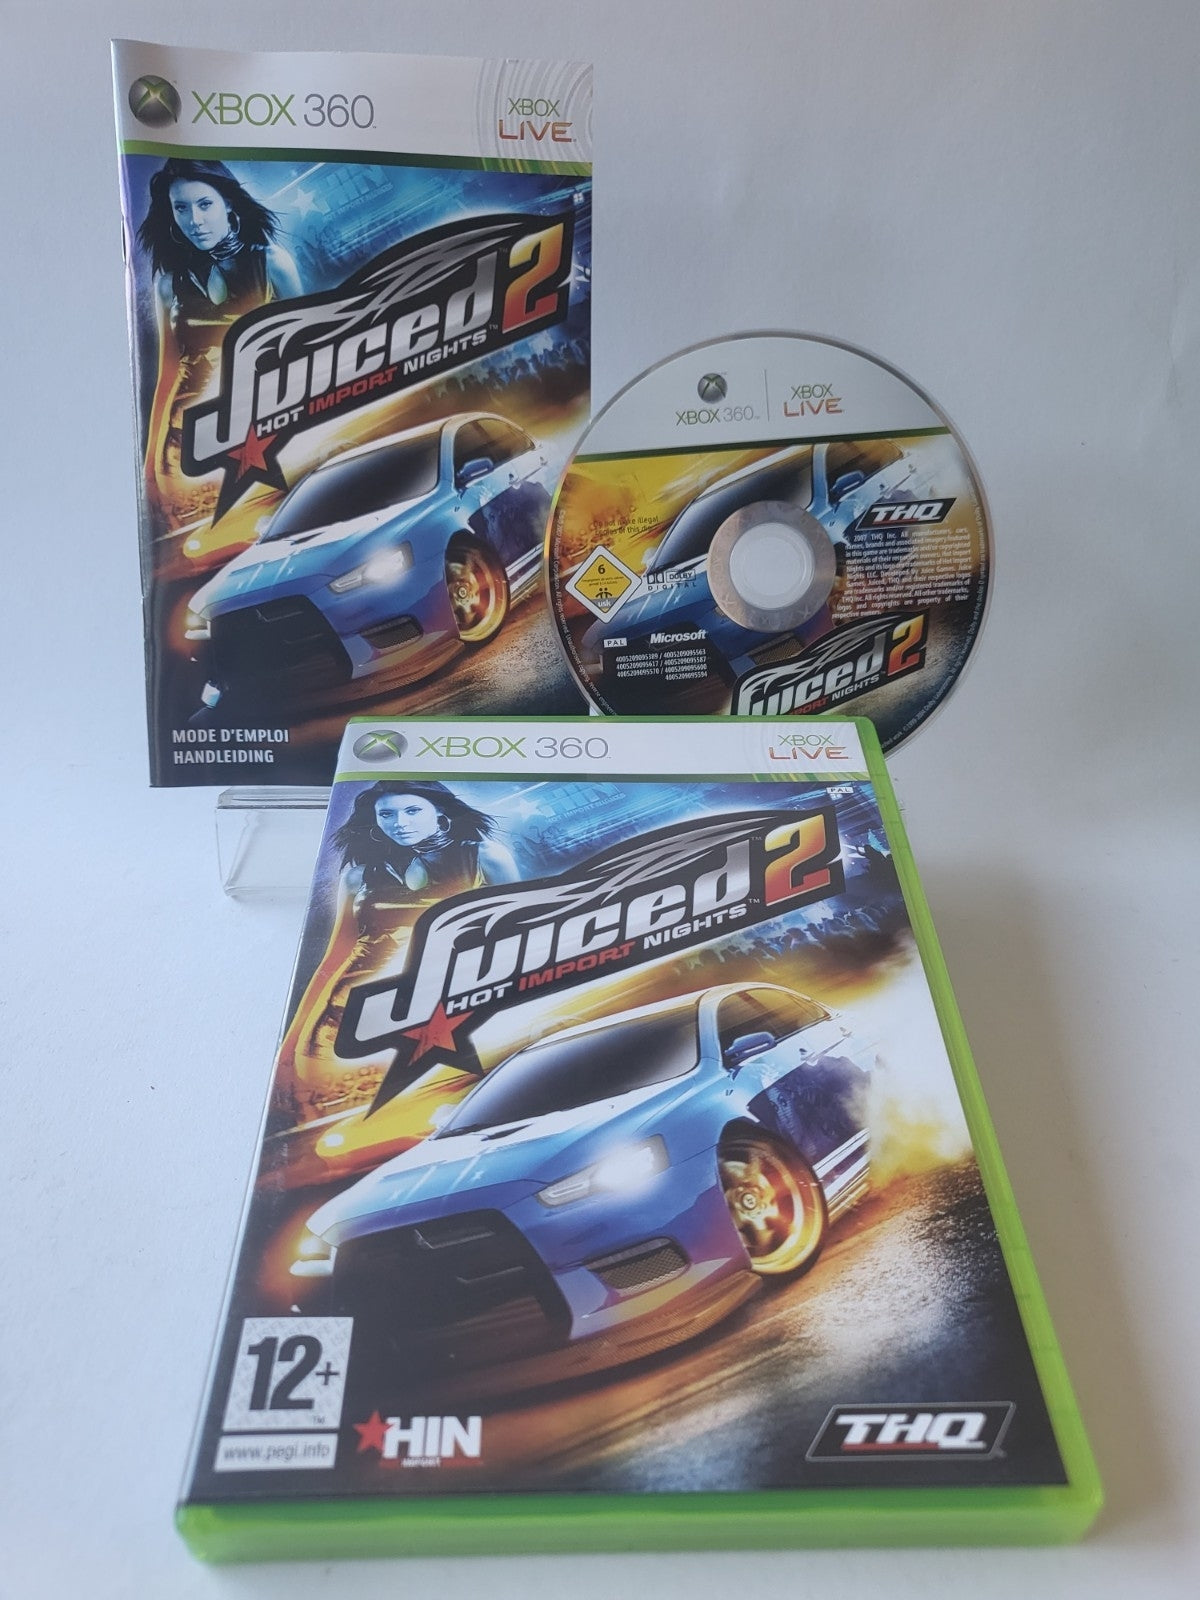 Juiced 2 Hot Import Nights Xbox 360